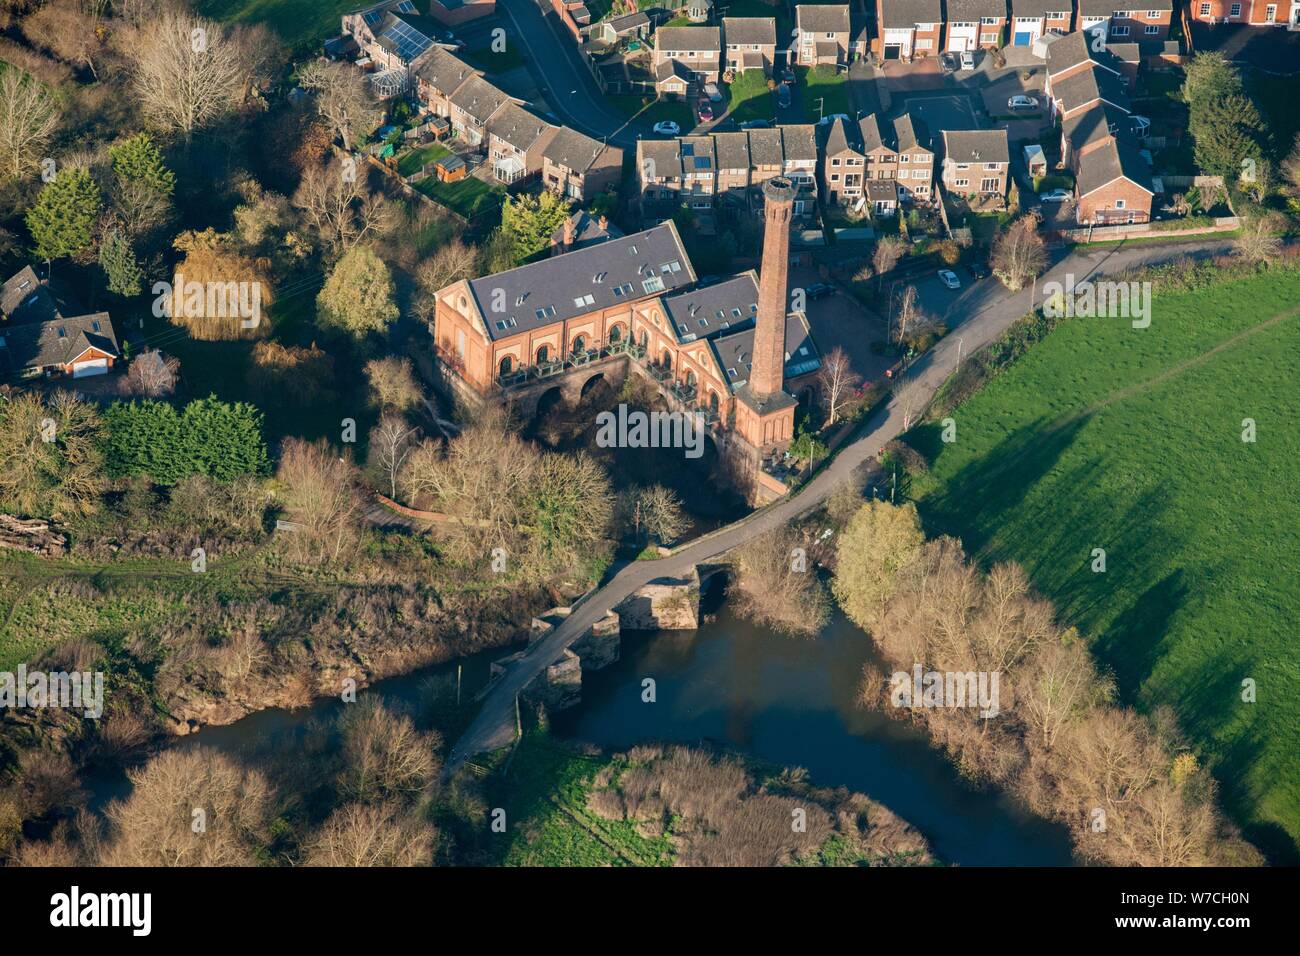 Site of the Battle of Powick Bridge and a former hydro-electricity works, Worcestershire, 2014. Creator: Historic England Staff Photographer. Stock Photo